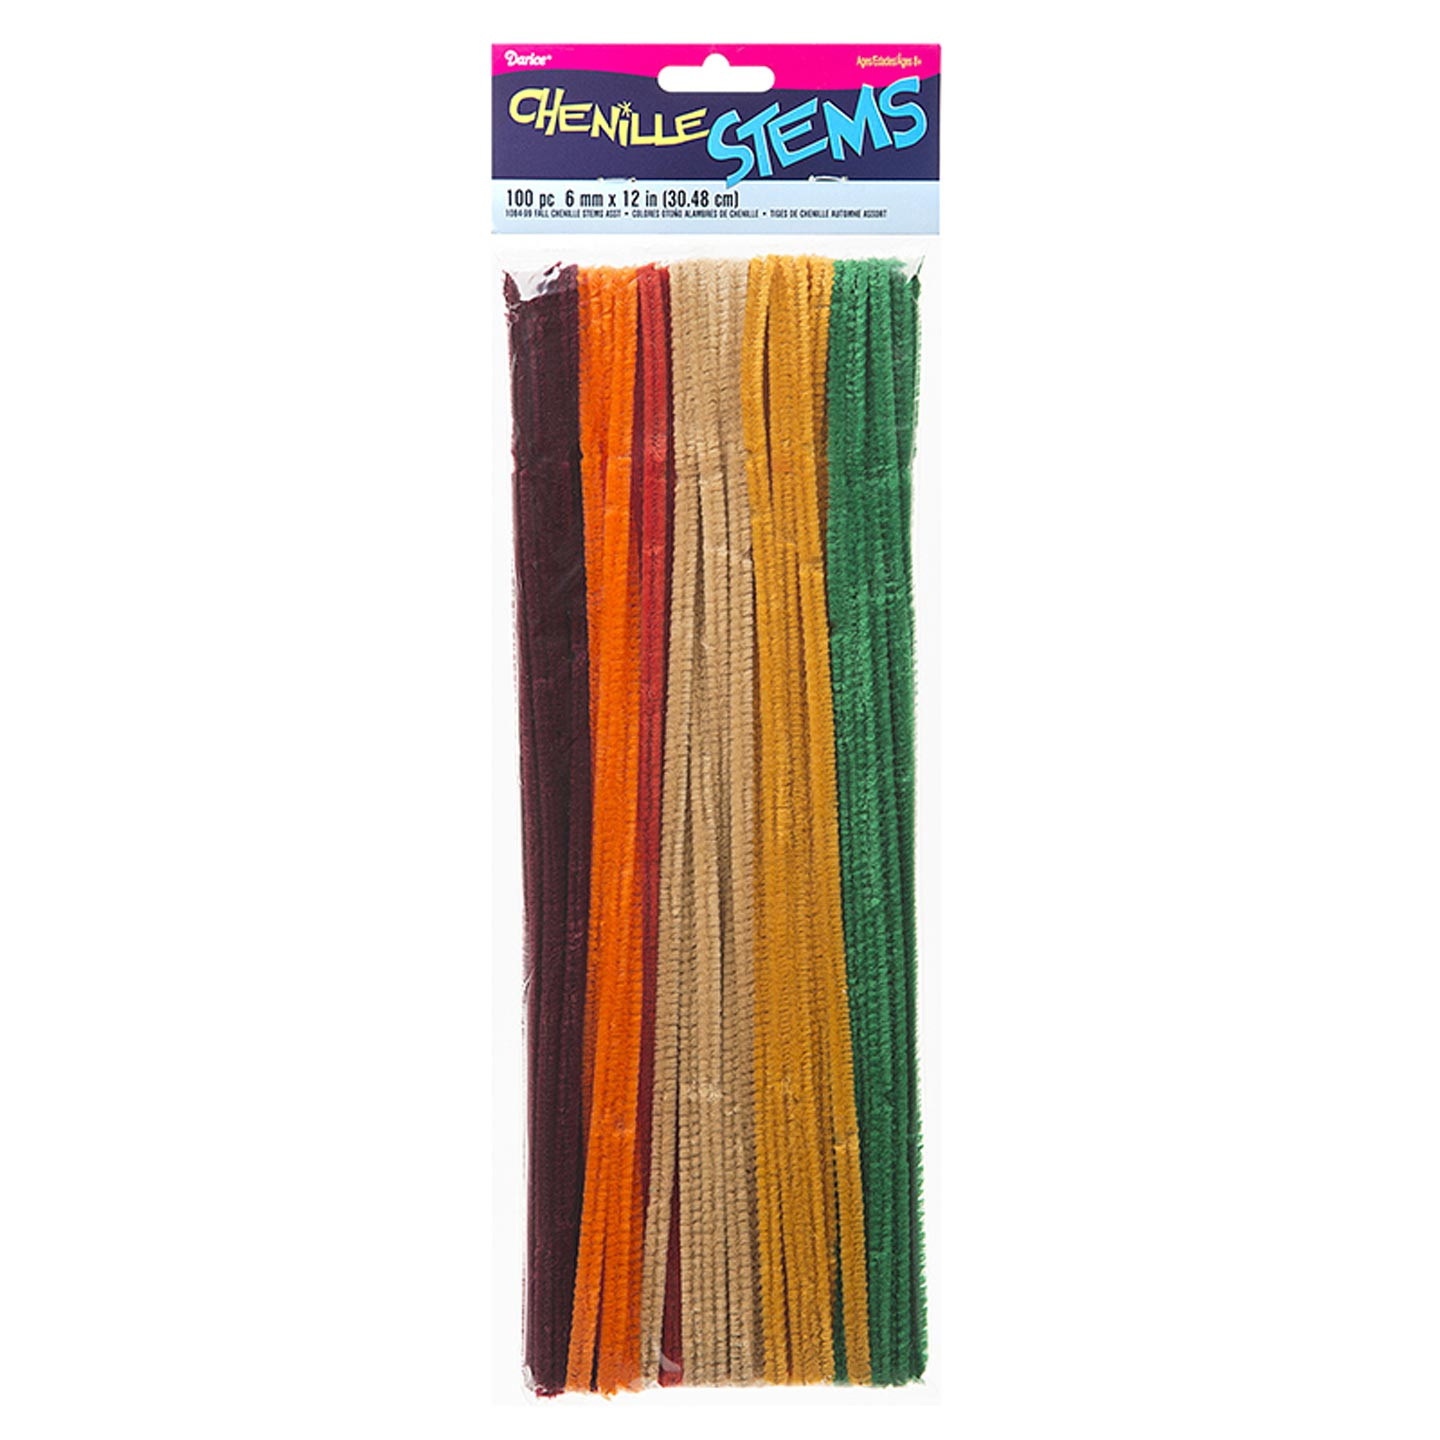 The Crafts Outlet Chenille Stems, Pipe Cleaner, 20-inch 50-cm, 100-pc, Emerald Green